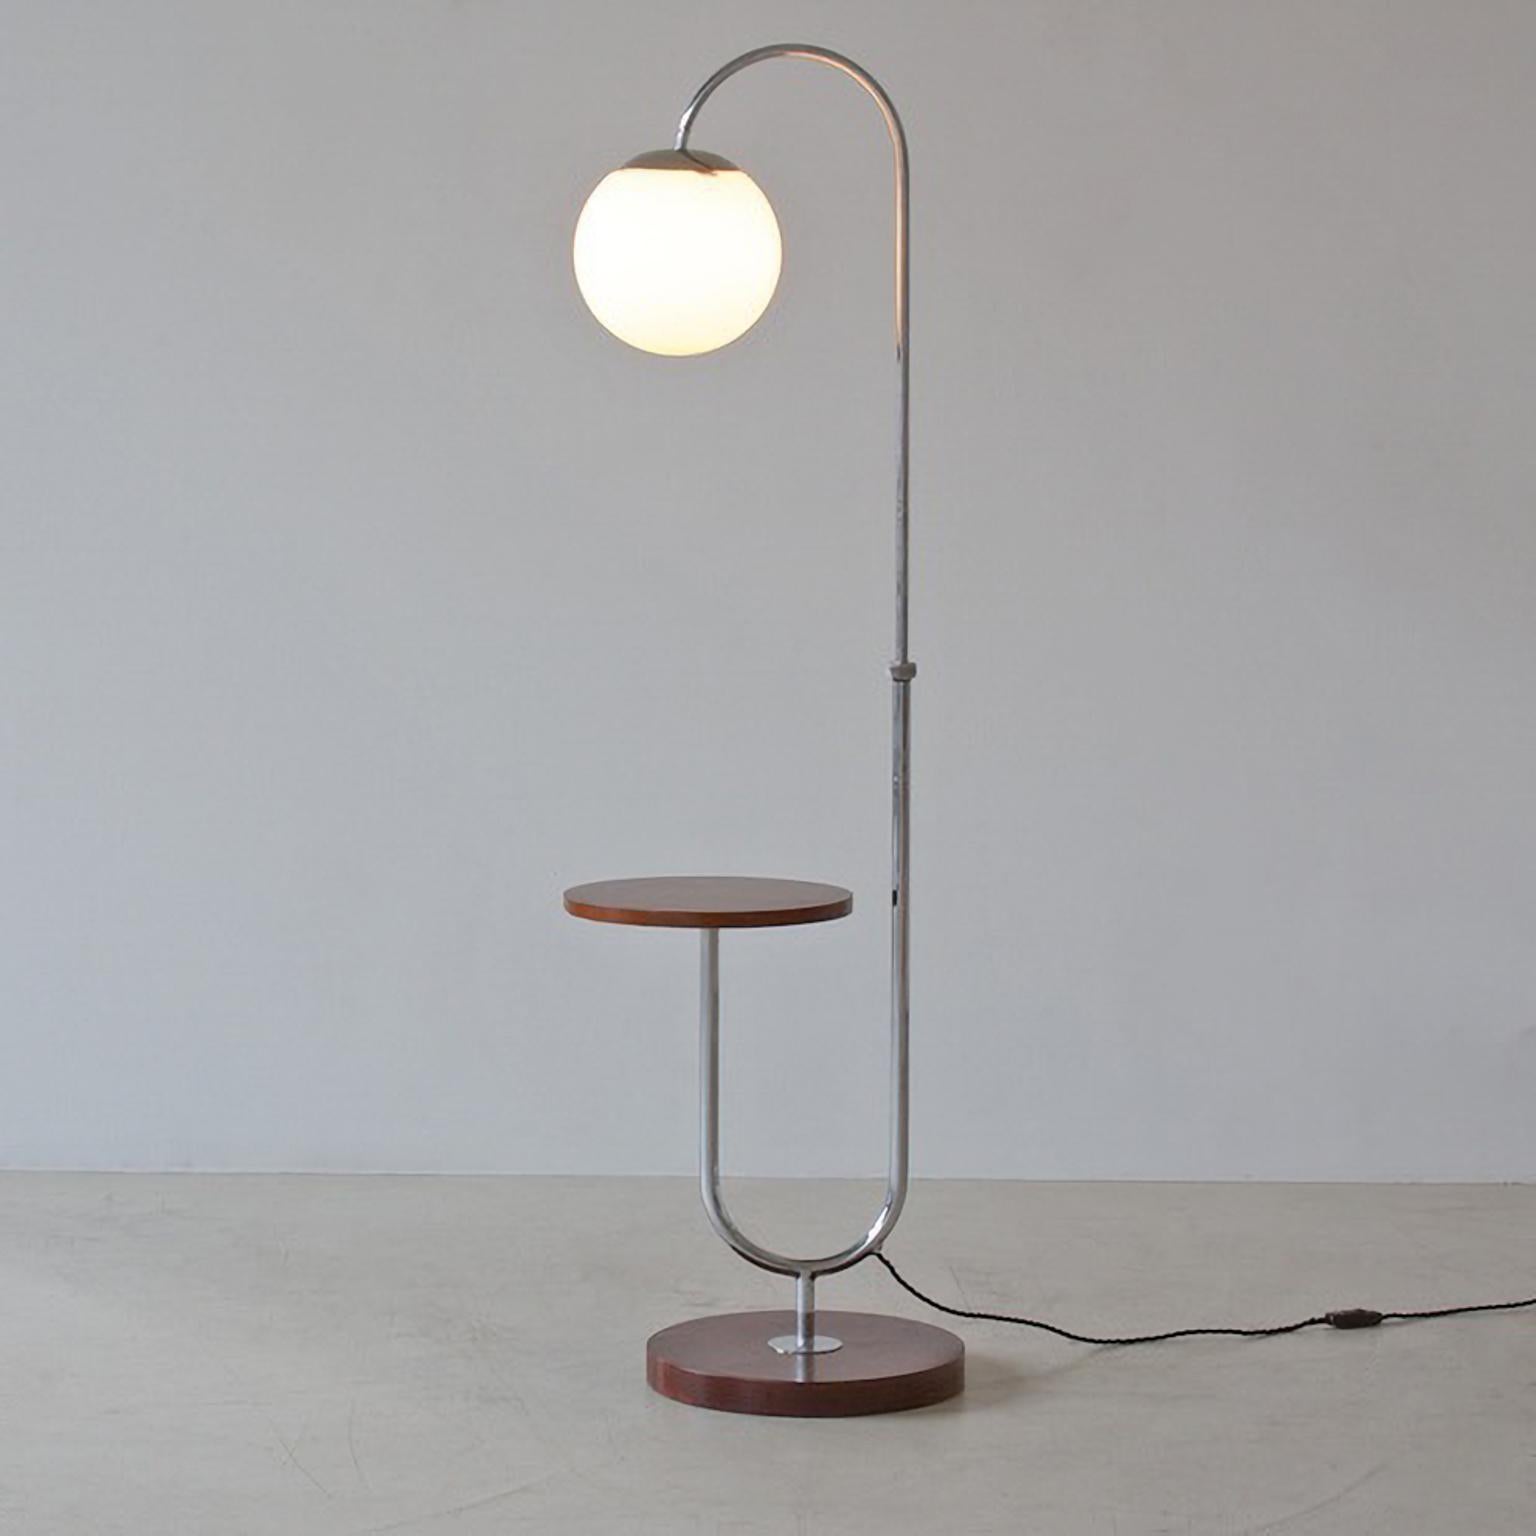 Art Deco Modernist Floor Lamp With Integrated Table, Nickel Plated Metal, Stained Wood For Sale